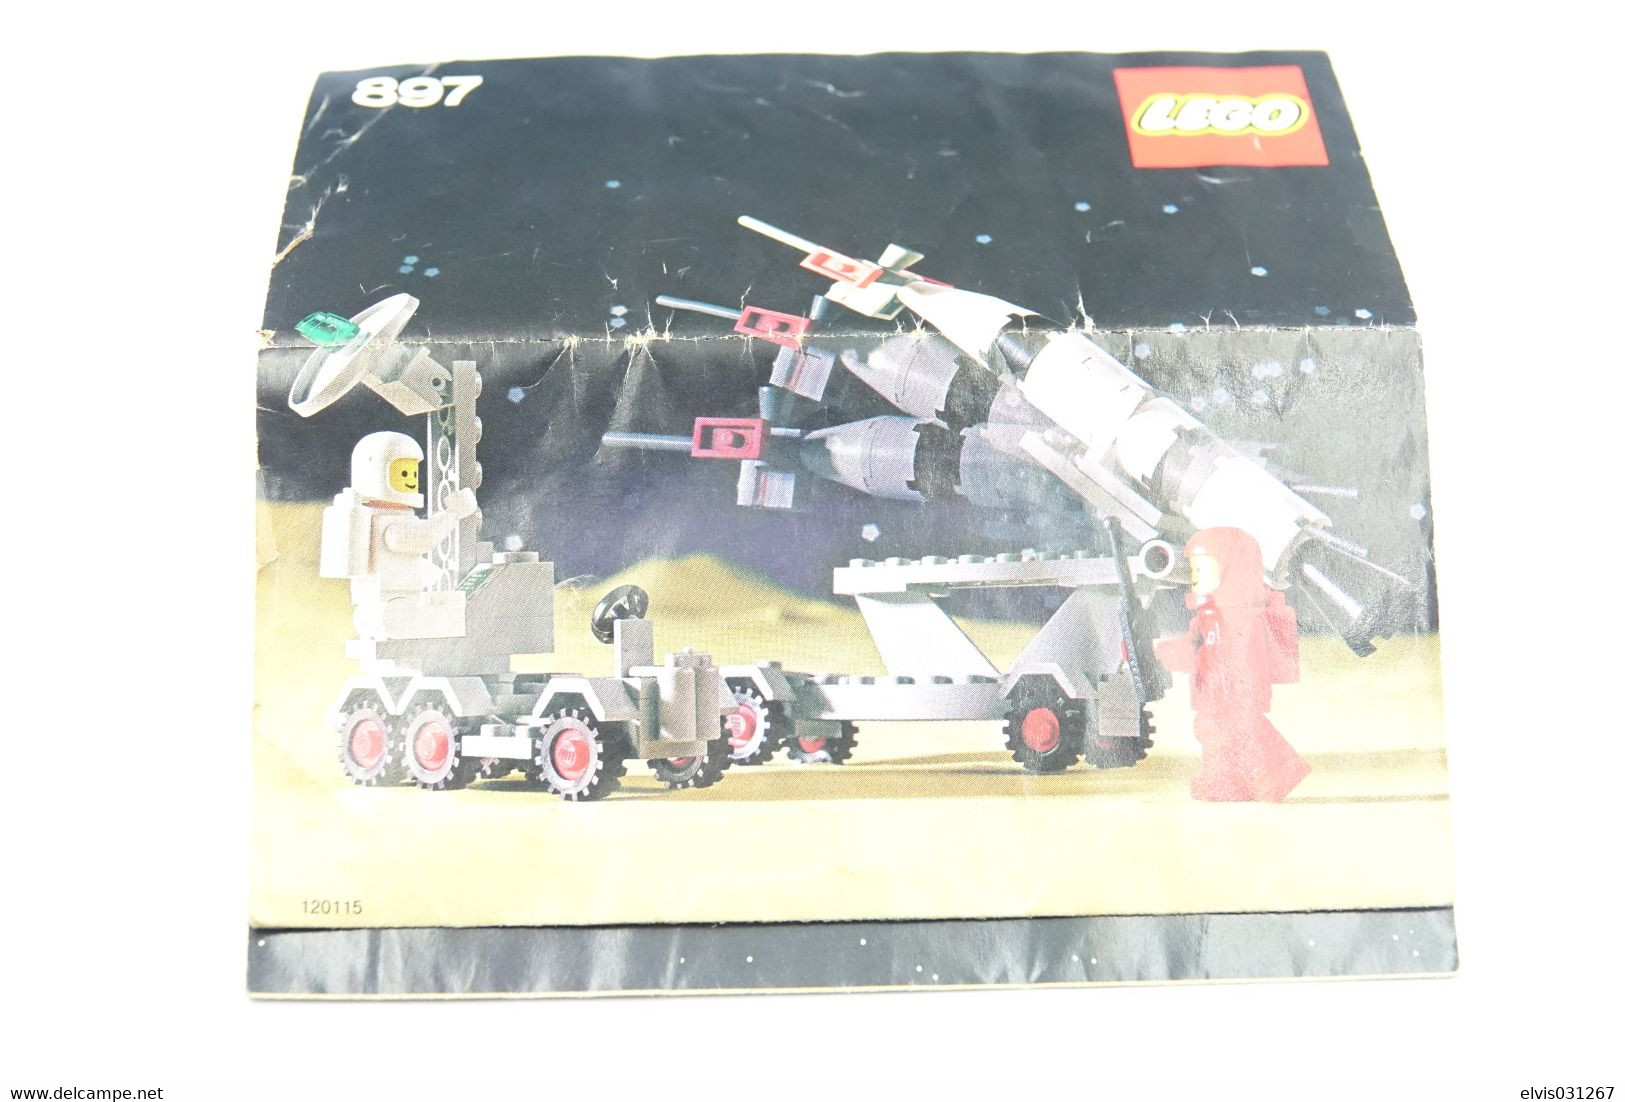 LEGO - 897 Mobile Rocket Launcher space with box and instruction manual - Original Lego 1979 - Vintage